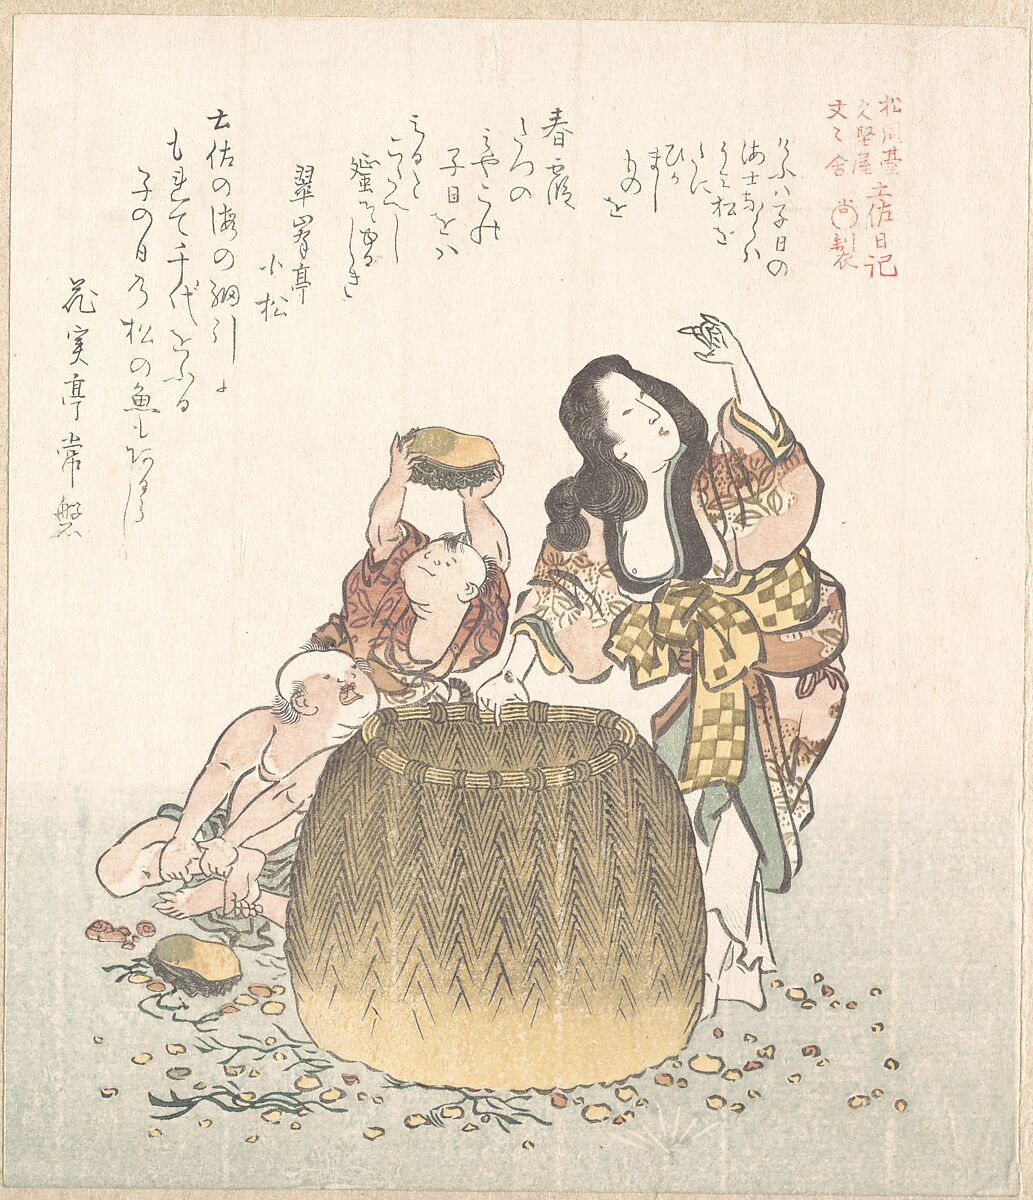 Fisherwoman with a Basket and Two Boys, Kubo Shunman (Japanese, 1757–1820) (?), Woodblock print (surimono); ink and color on paper, Japan 